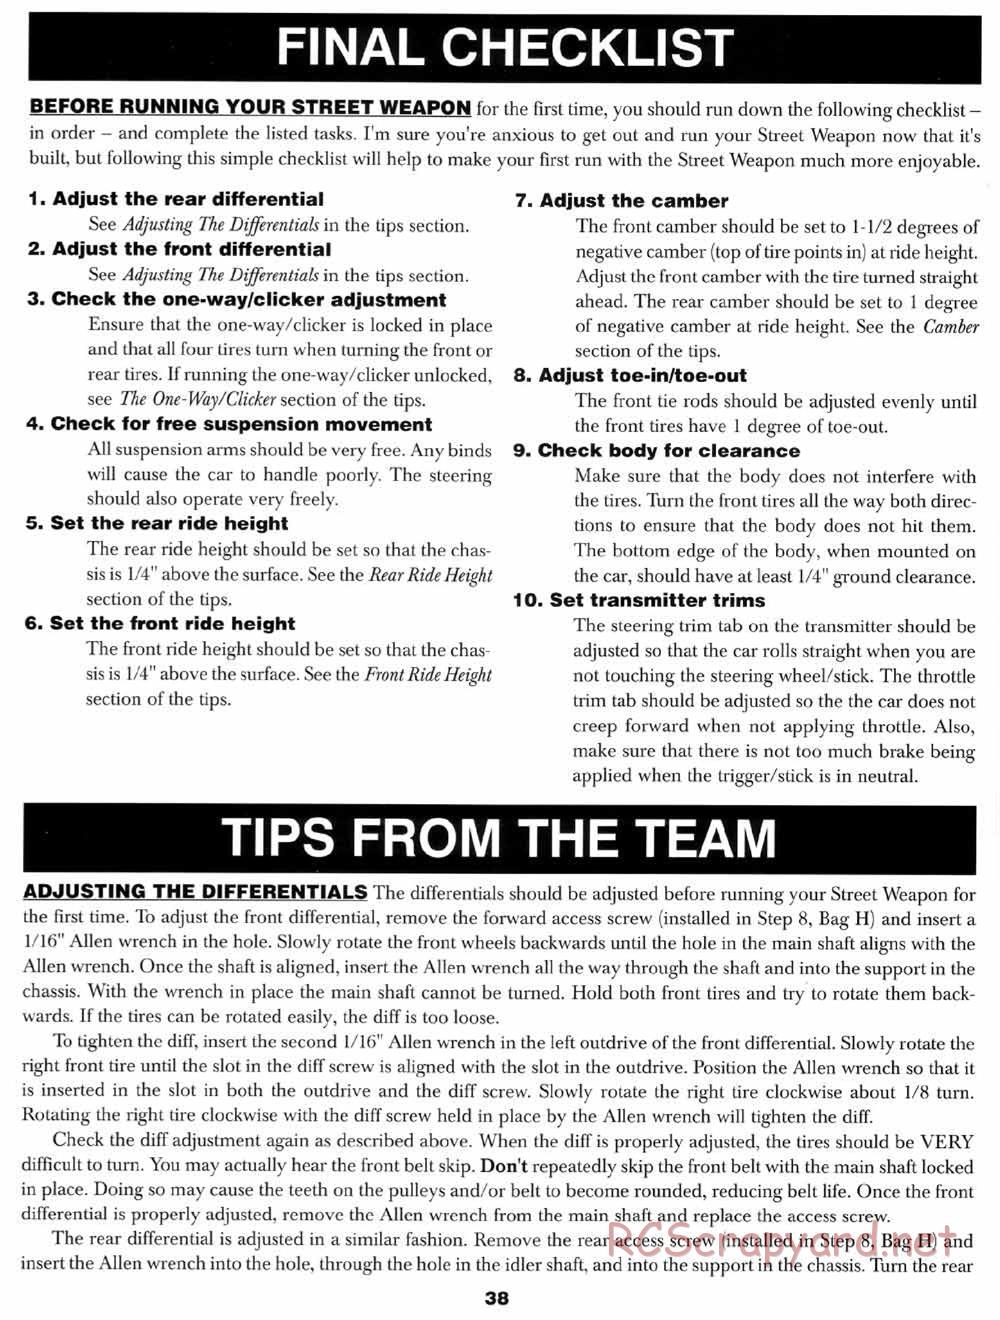 Team Losi - Street Weapon - Manual - Page 41